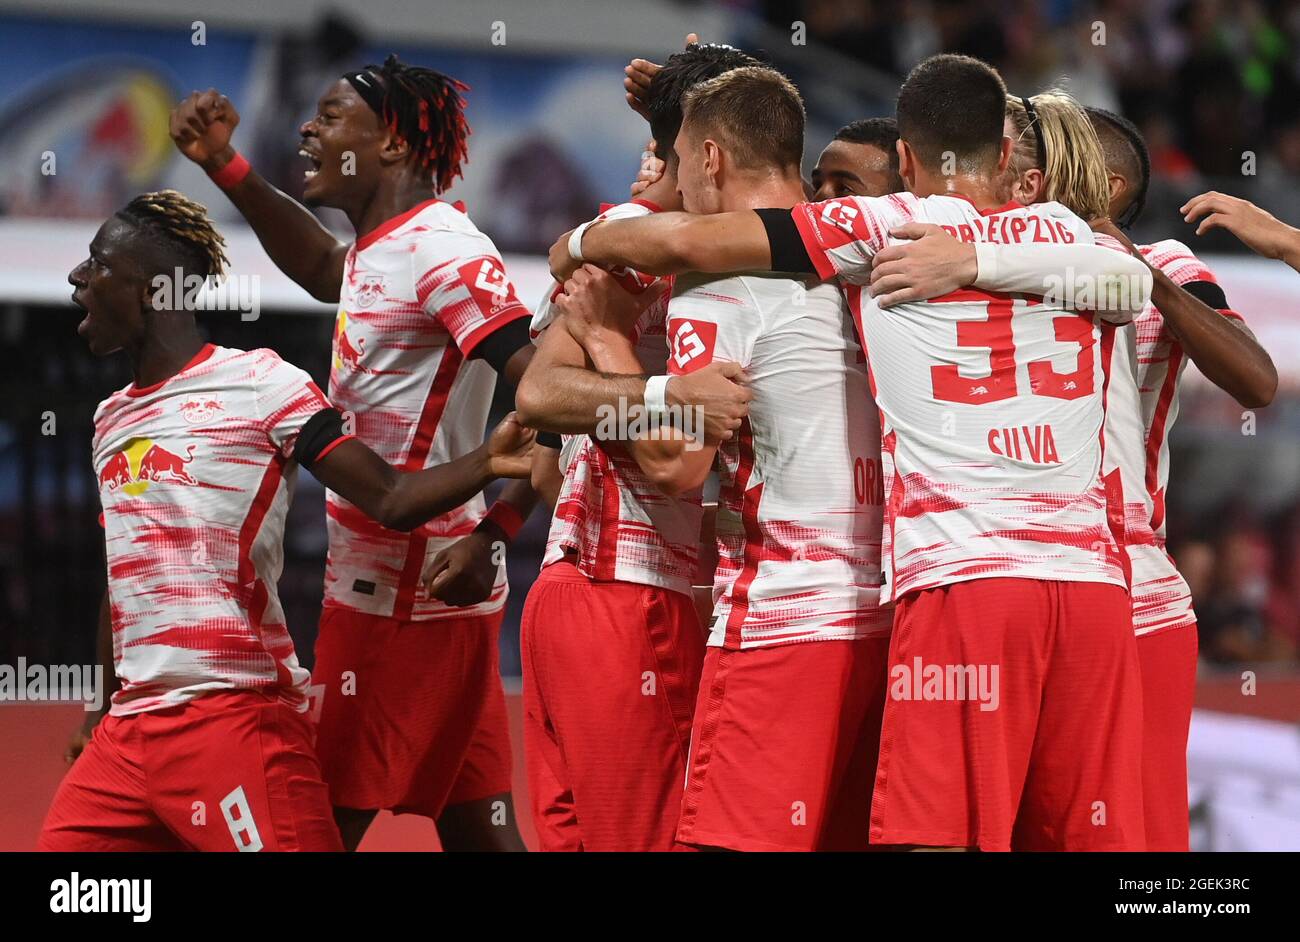 Leipzig, Germany. 20th Aug, 2021. Football, Bundesliga, RB Leipzig - VfB  Stuttgart, Matchday 2, Red Bull Arena: Leipzig players celebrate the goal  to make it 1:0. IMPORTANT NOTE: In accordance with the